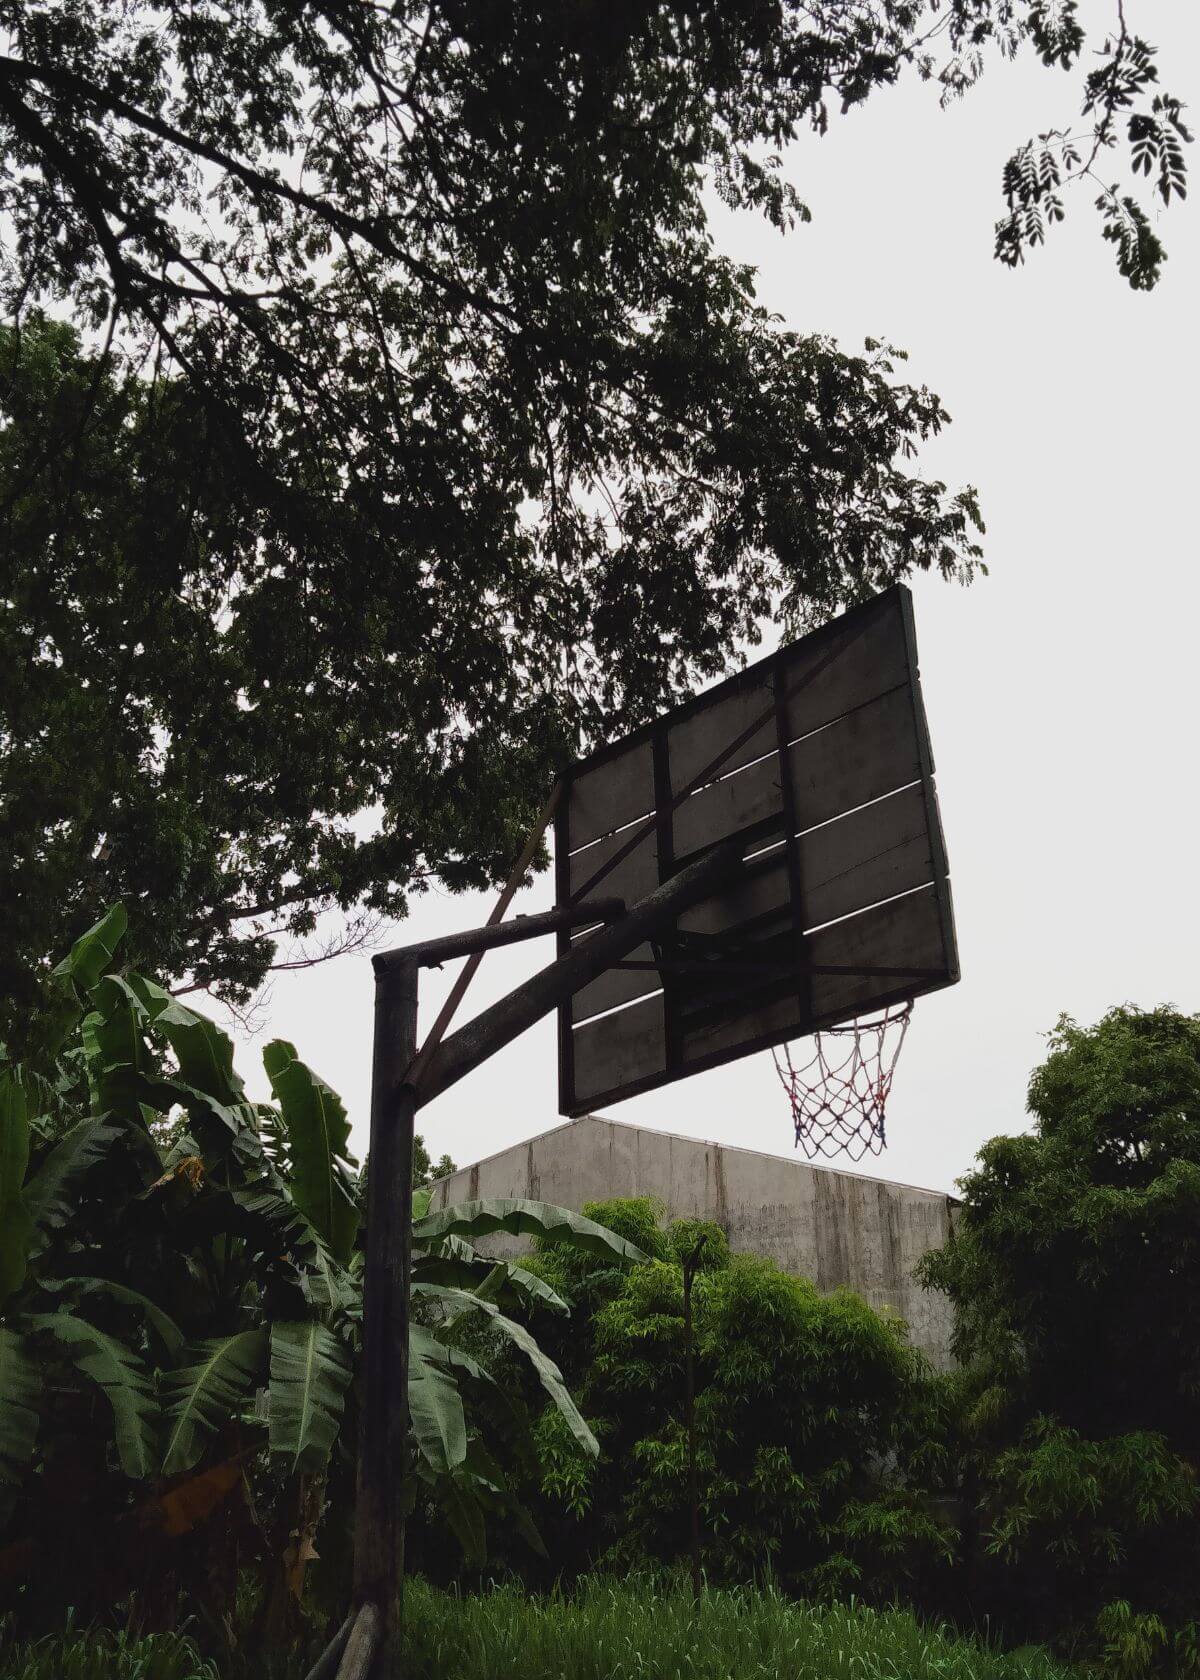 How Much Does It Cost To Put A Basketball Hoop In The Ground?